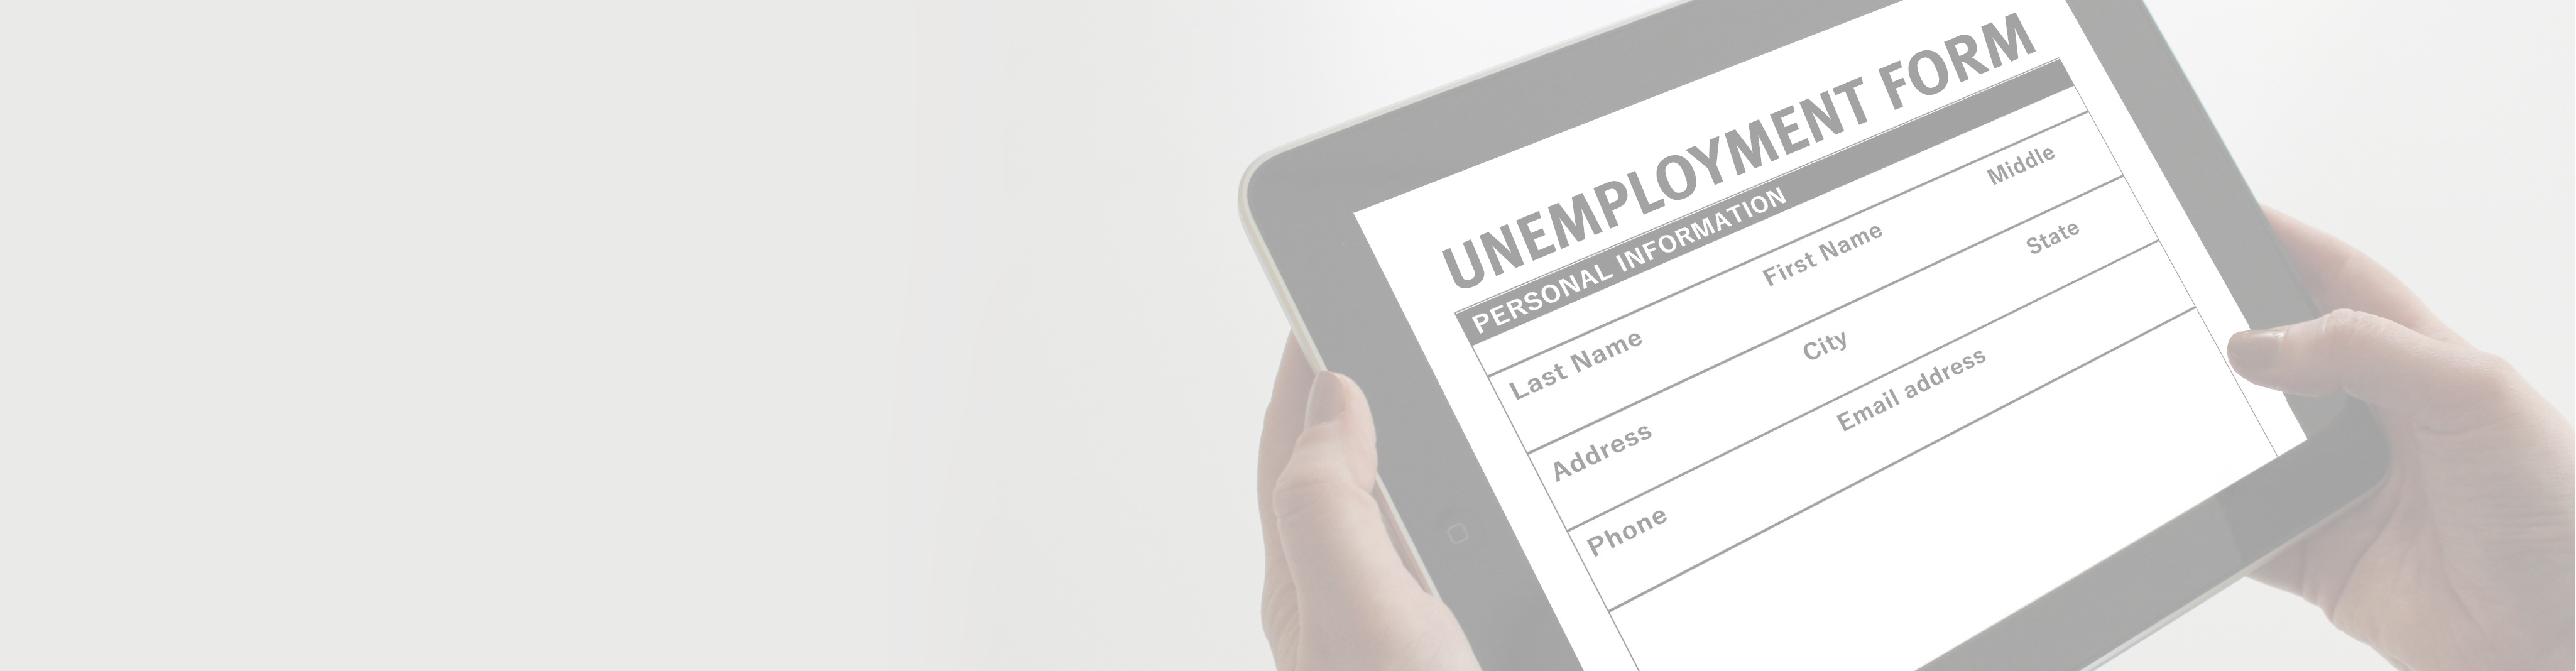 hands holding a tablet with an unemployment form on it